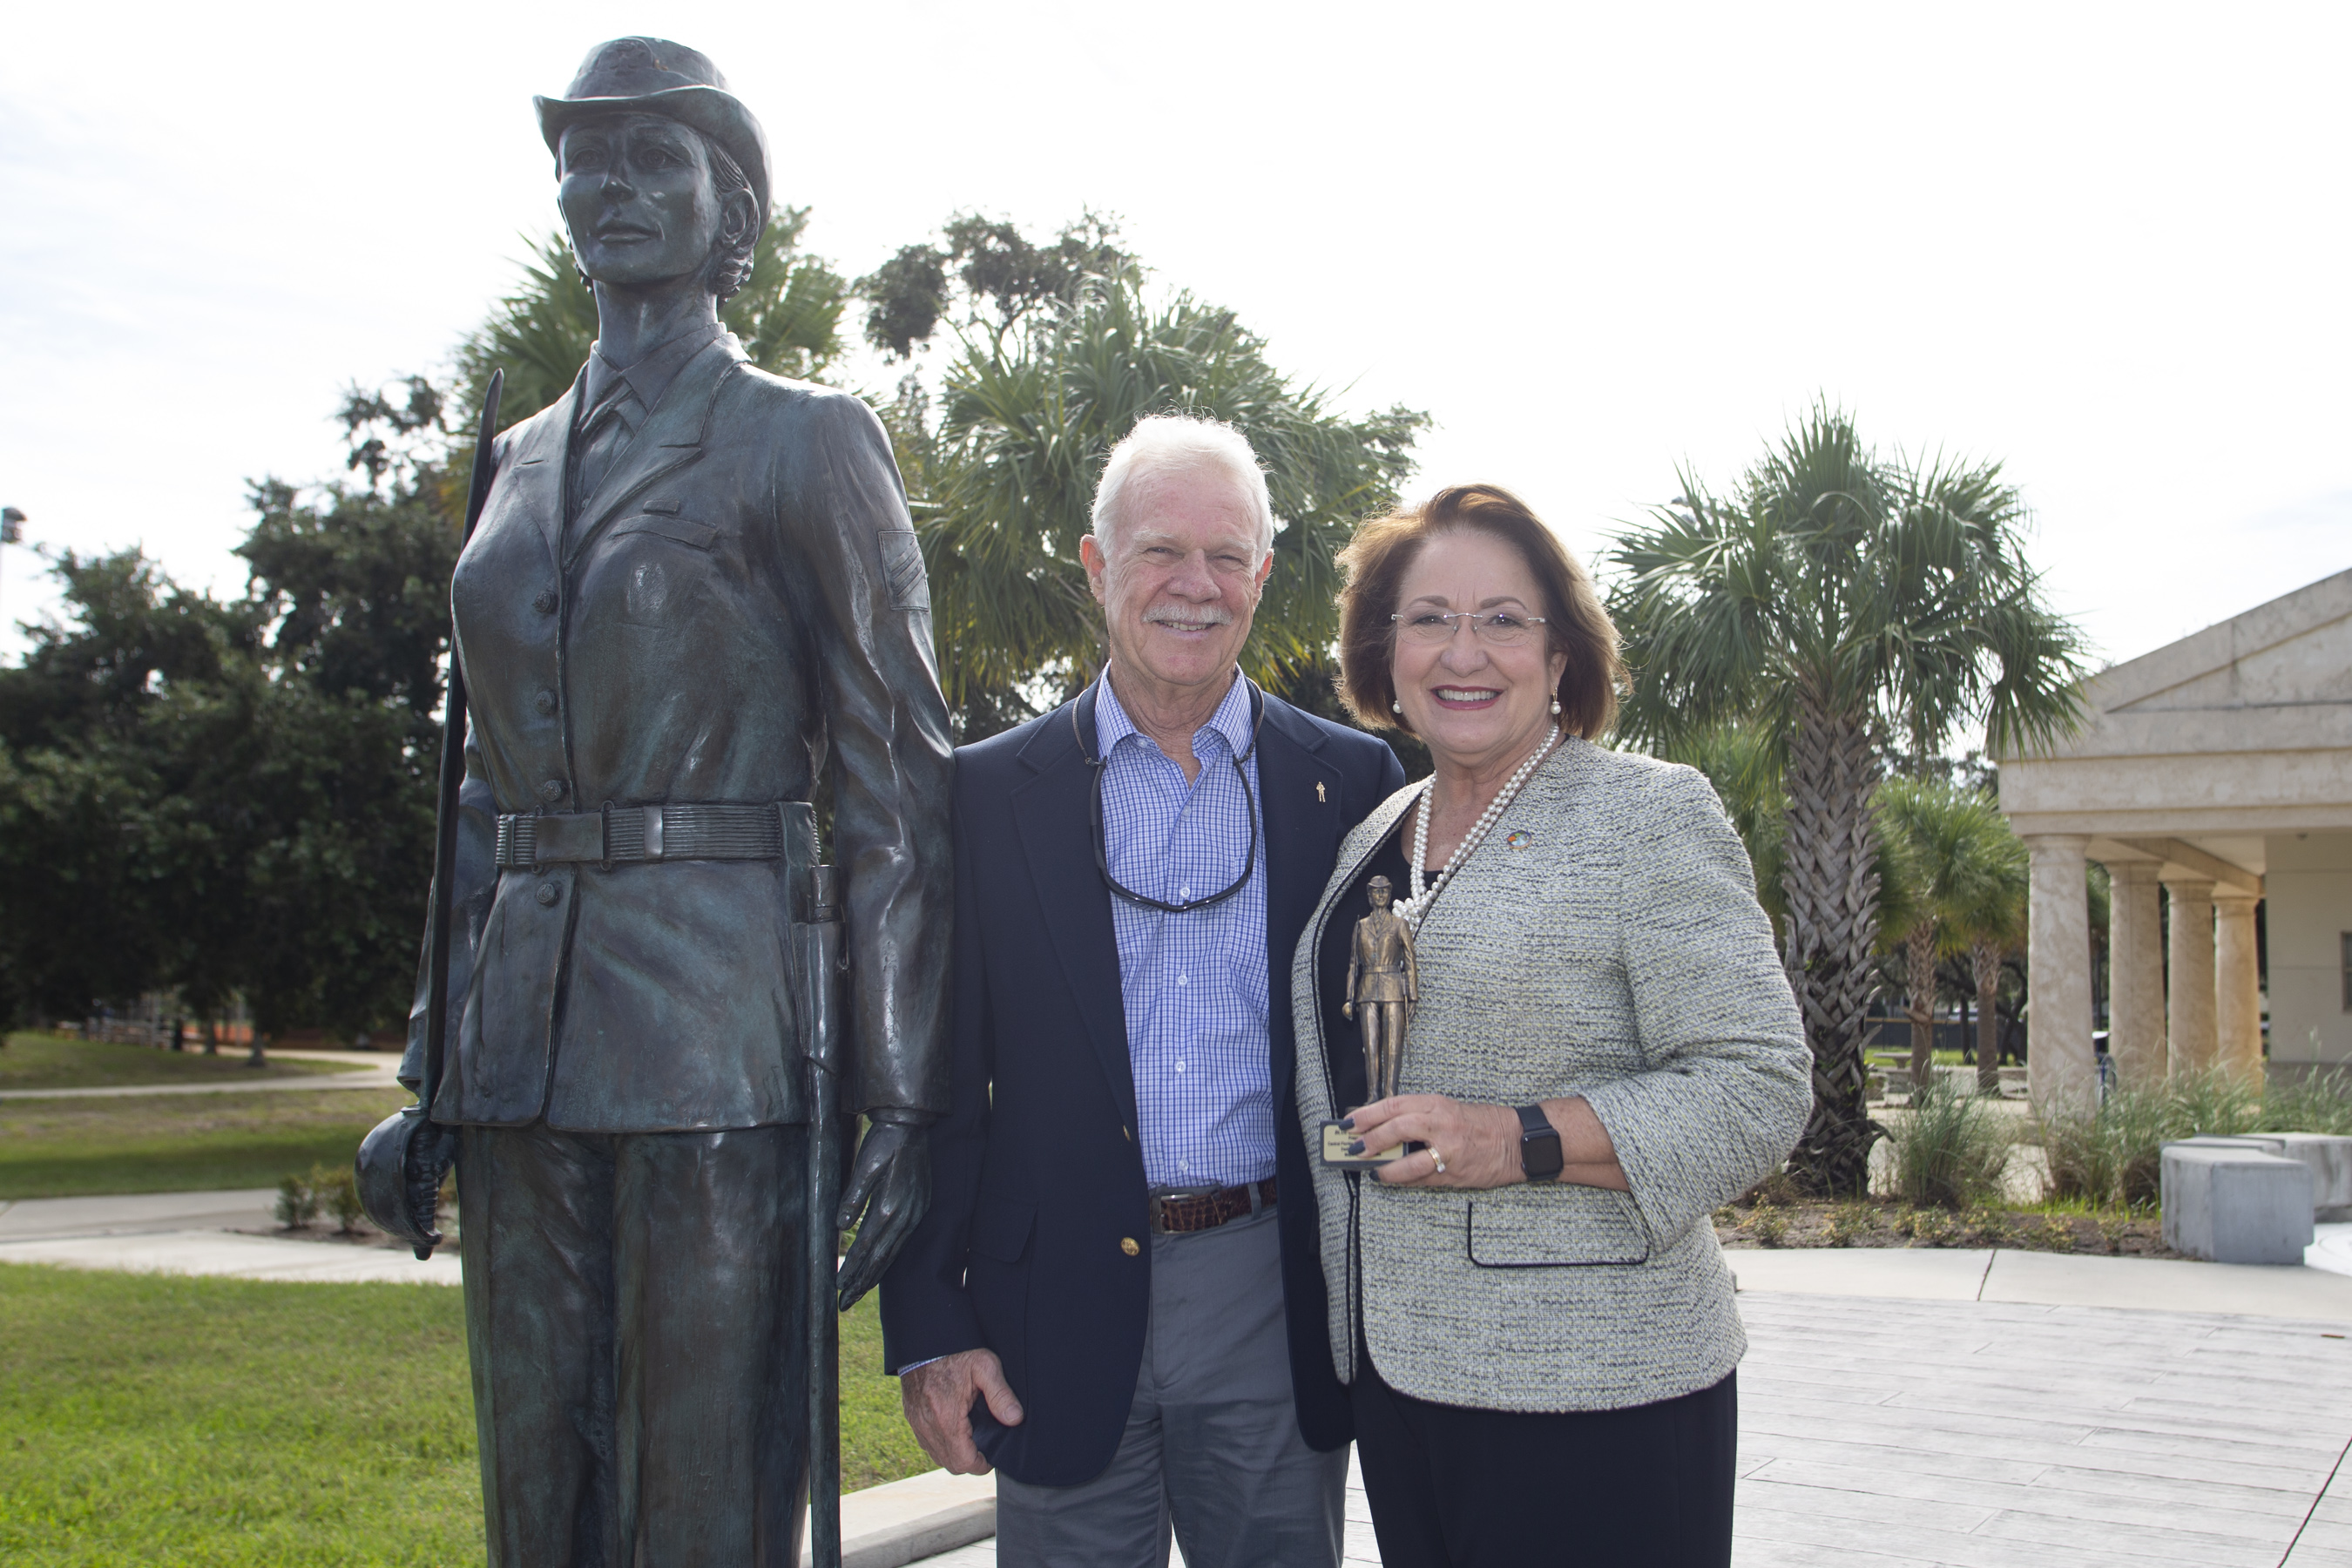 Mayor Jacobs and a man standing alongside a statuette